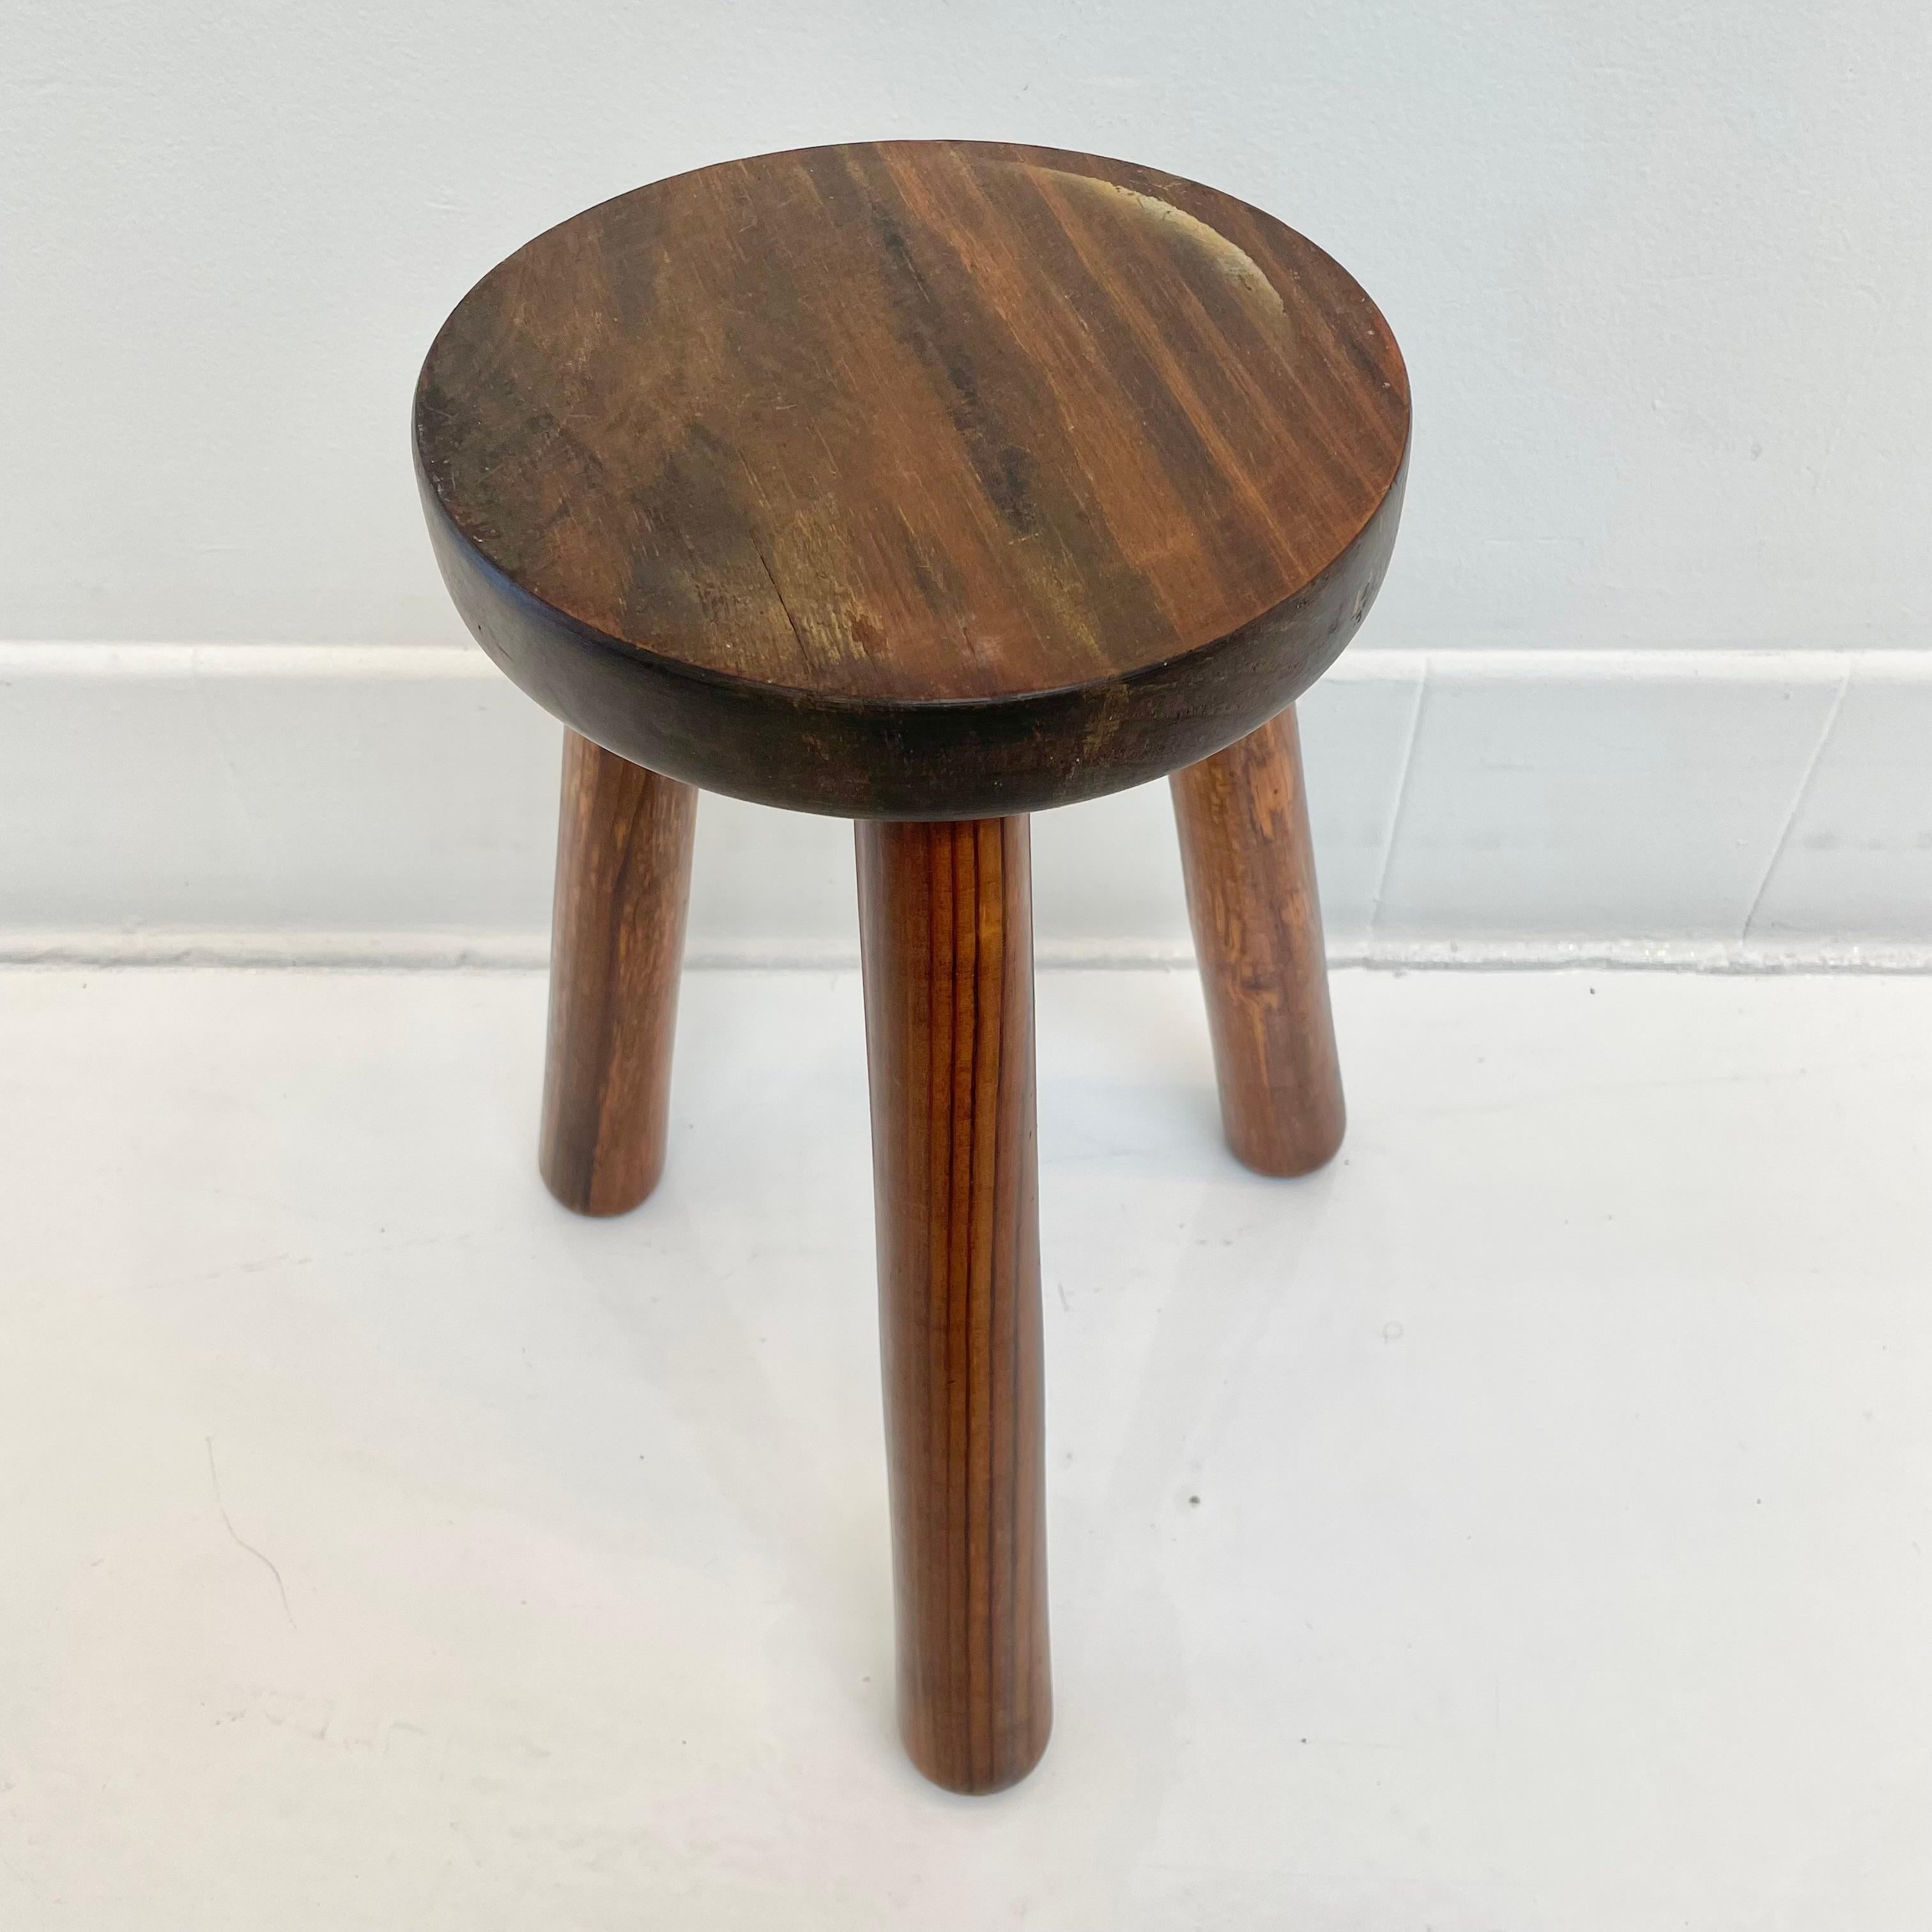 Beautiful 3 legged stool made in France, circa 1960s. Round seat held up by three sturdy wooden legs that are screwed into metal anchors in the seat giving this stool added strength and stability. Dark patina and age have made this stool a perfect